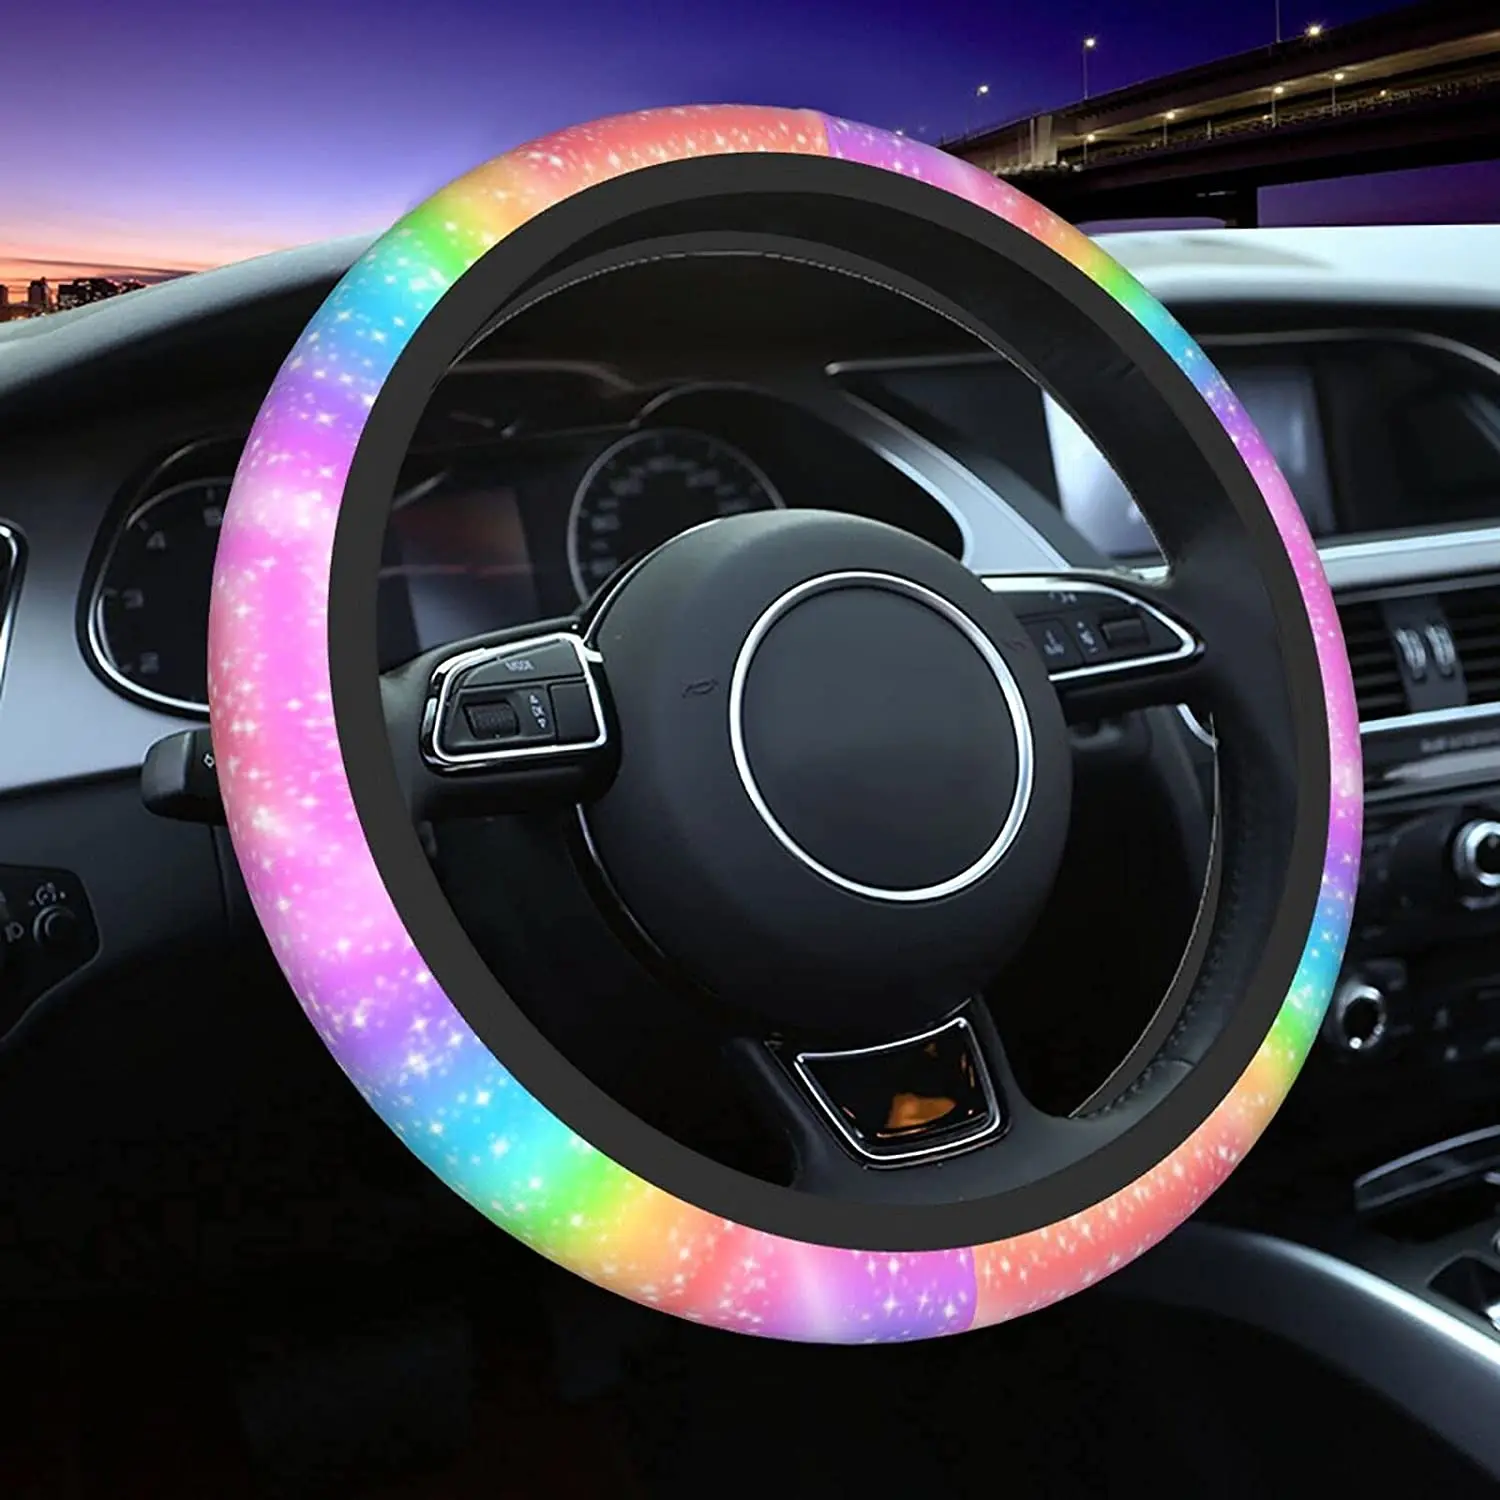 Colorful Rainbow Steering Wheel Cover Car Accessories Cute for Women Girls Girly 15 Inch  Auto Interior Decor Anti Slip Truck